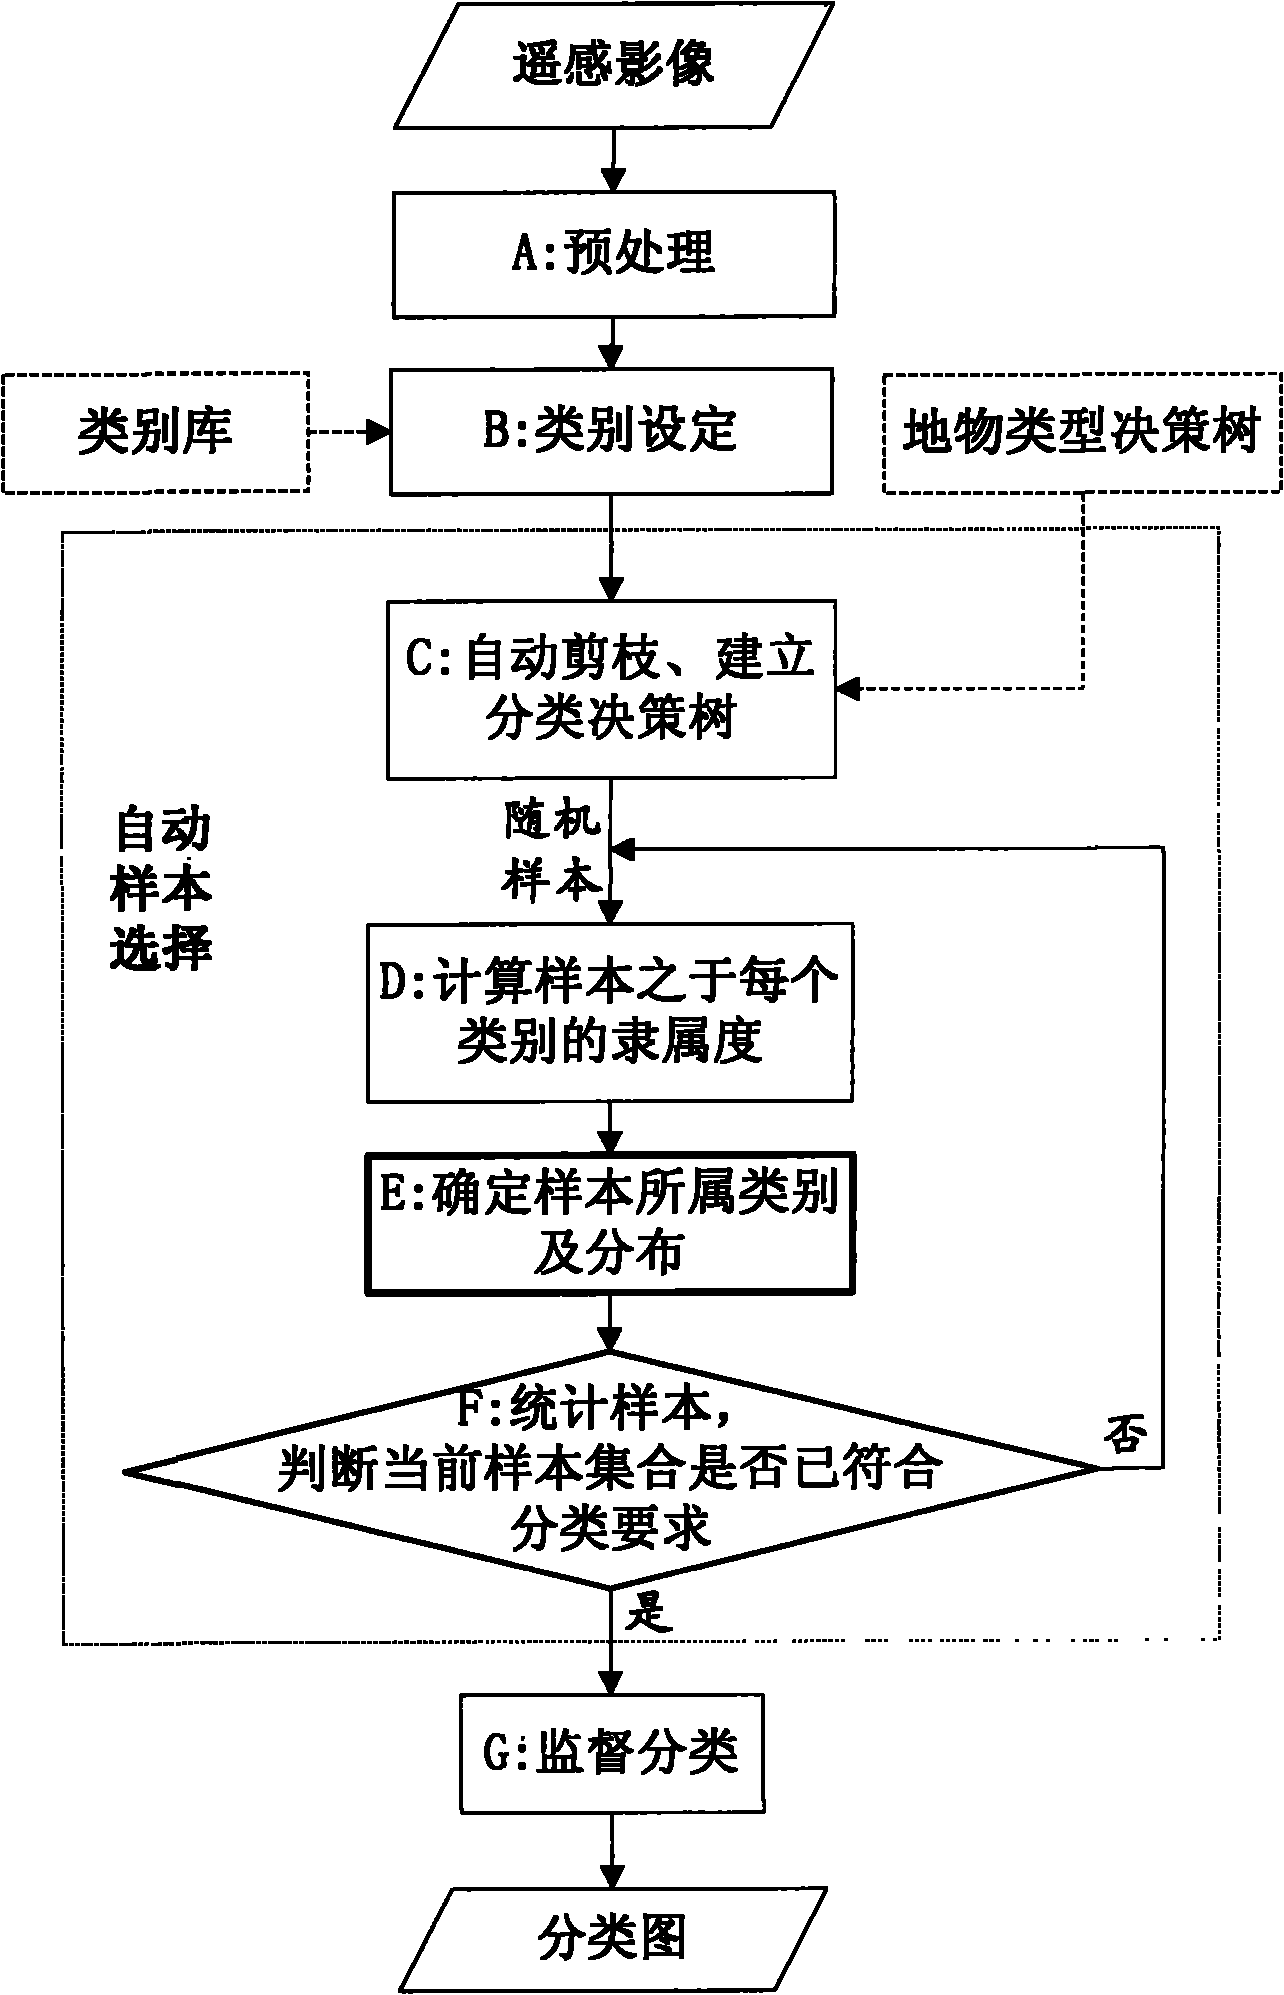 Method for full-automatic sample selection oriented to classification of remote-sensing images